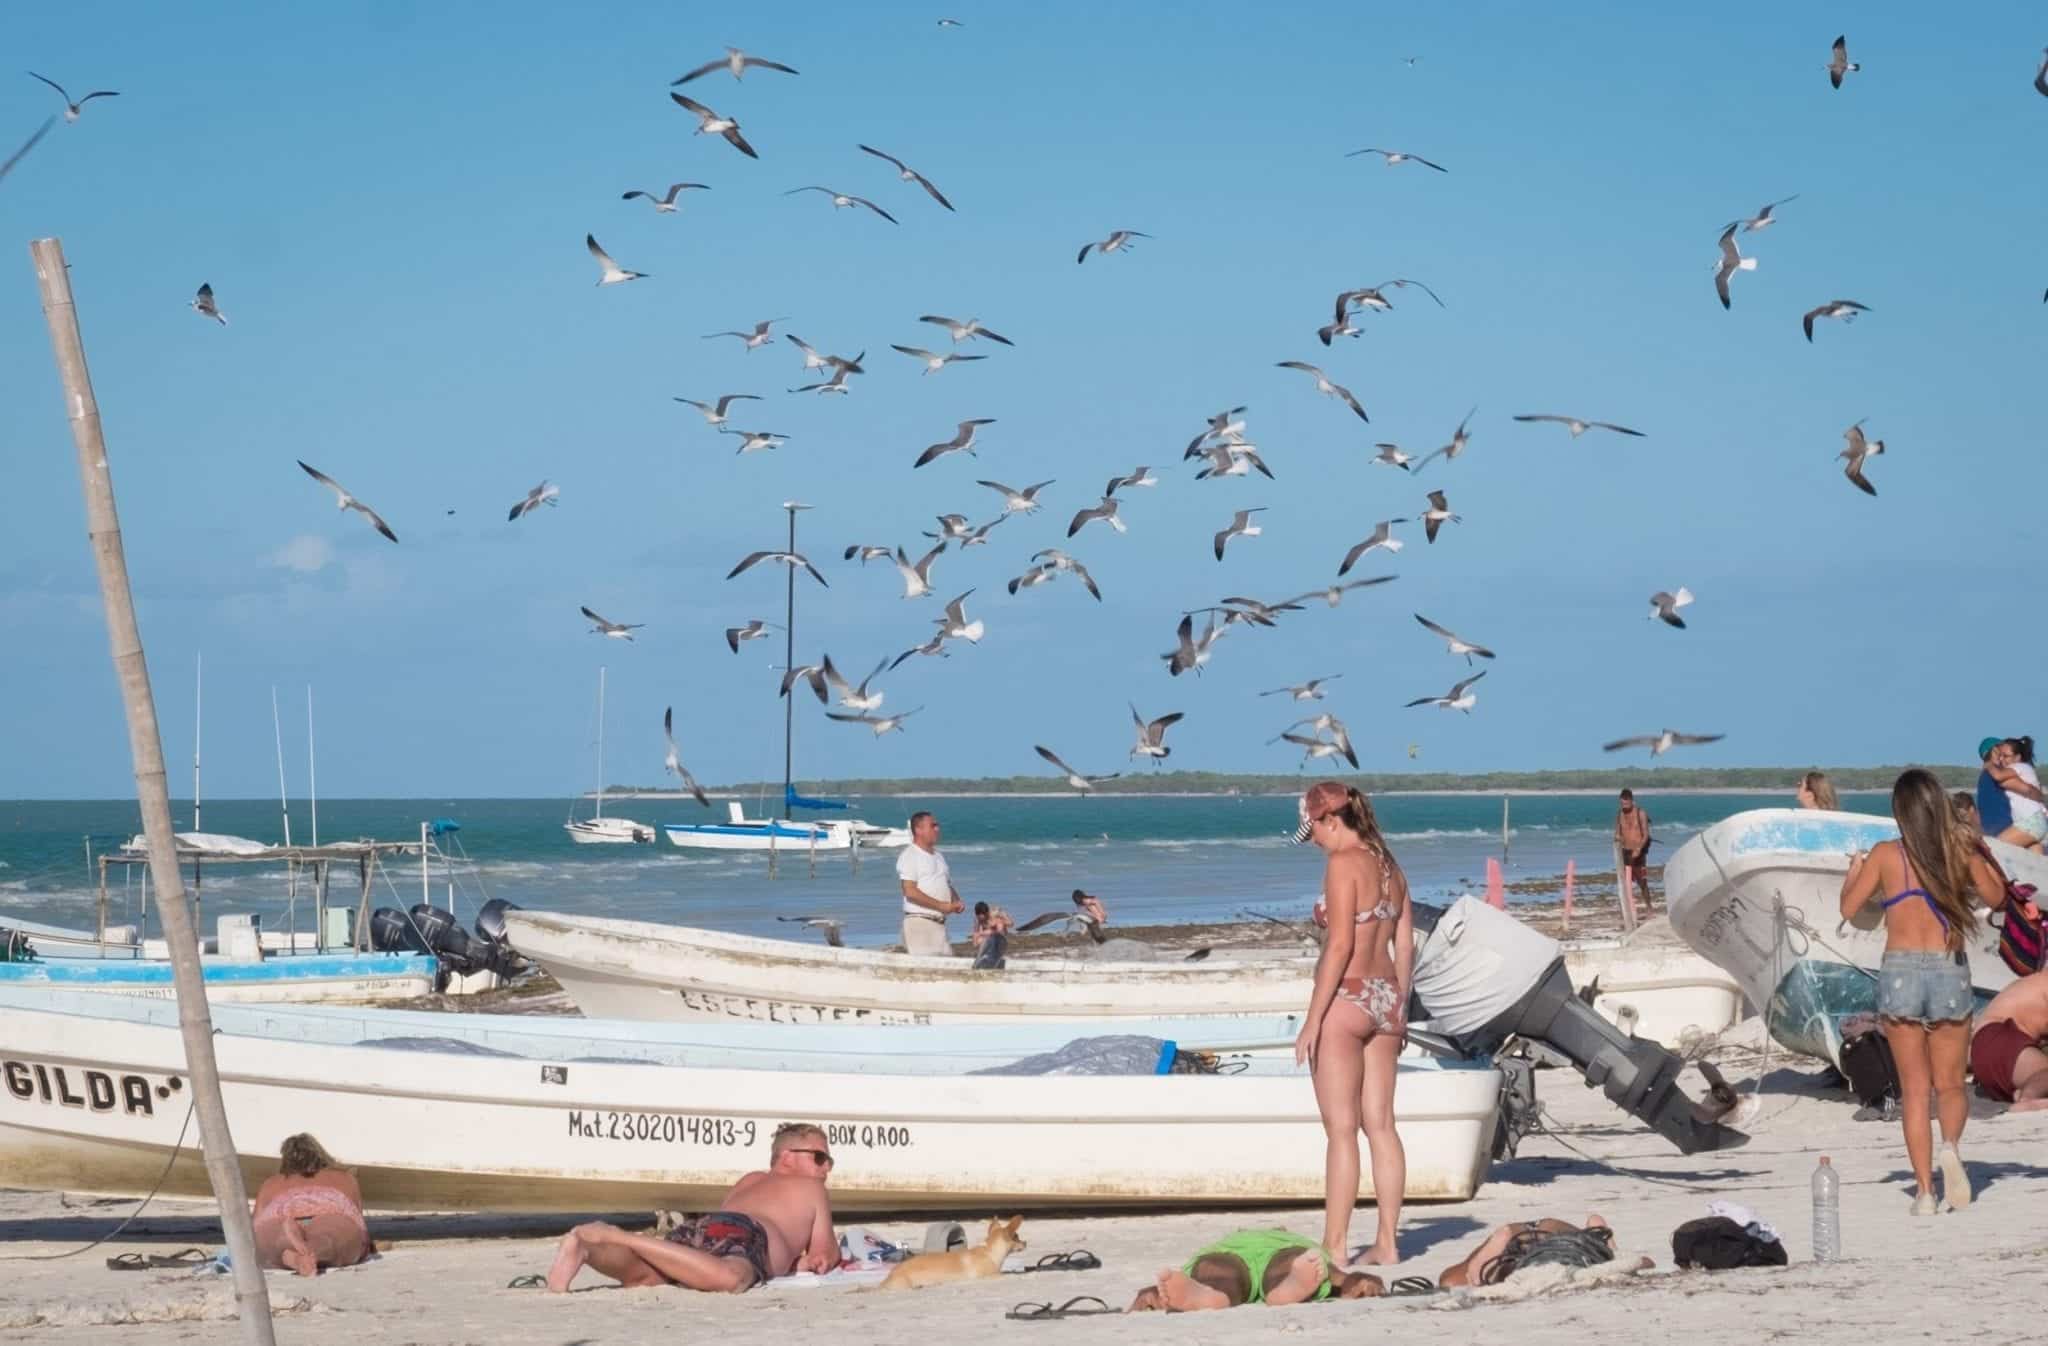 Several people and boats on a beach with lots of birds flying above.